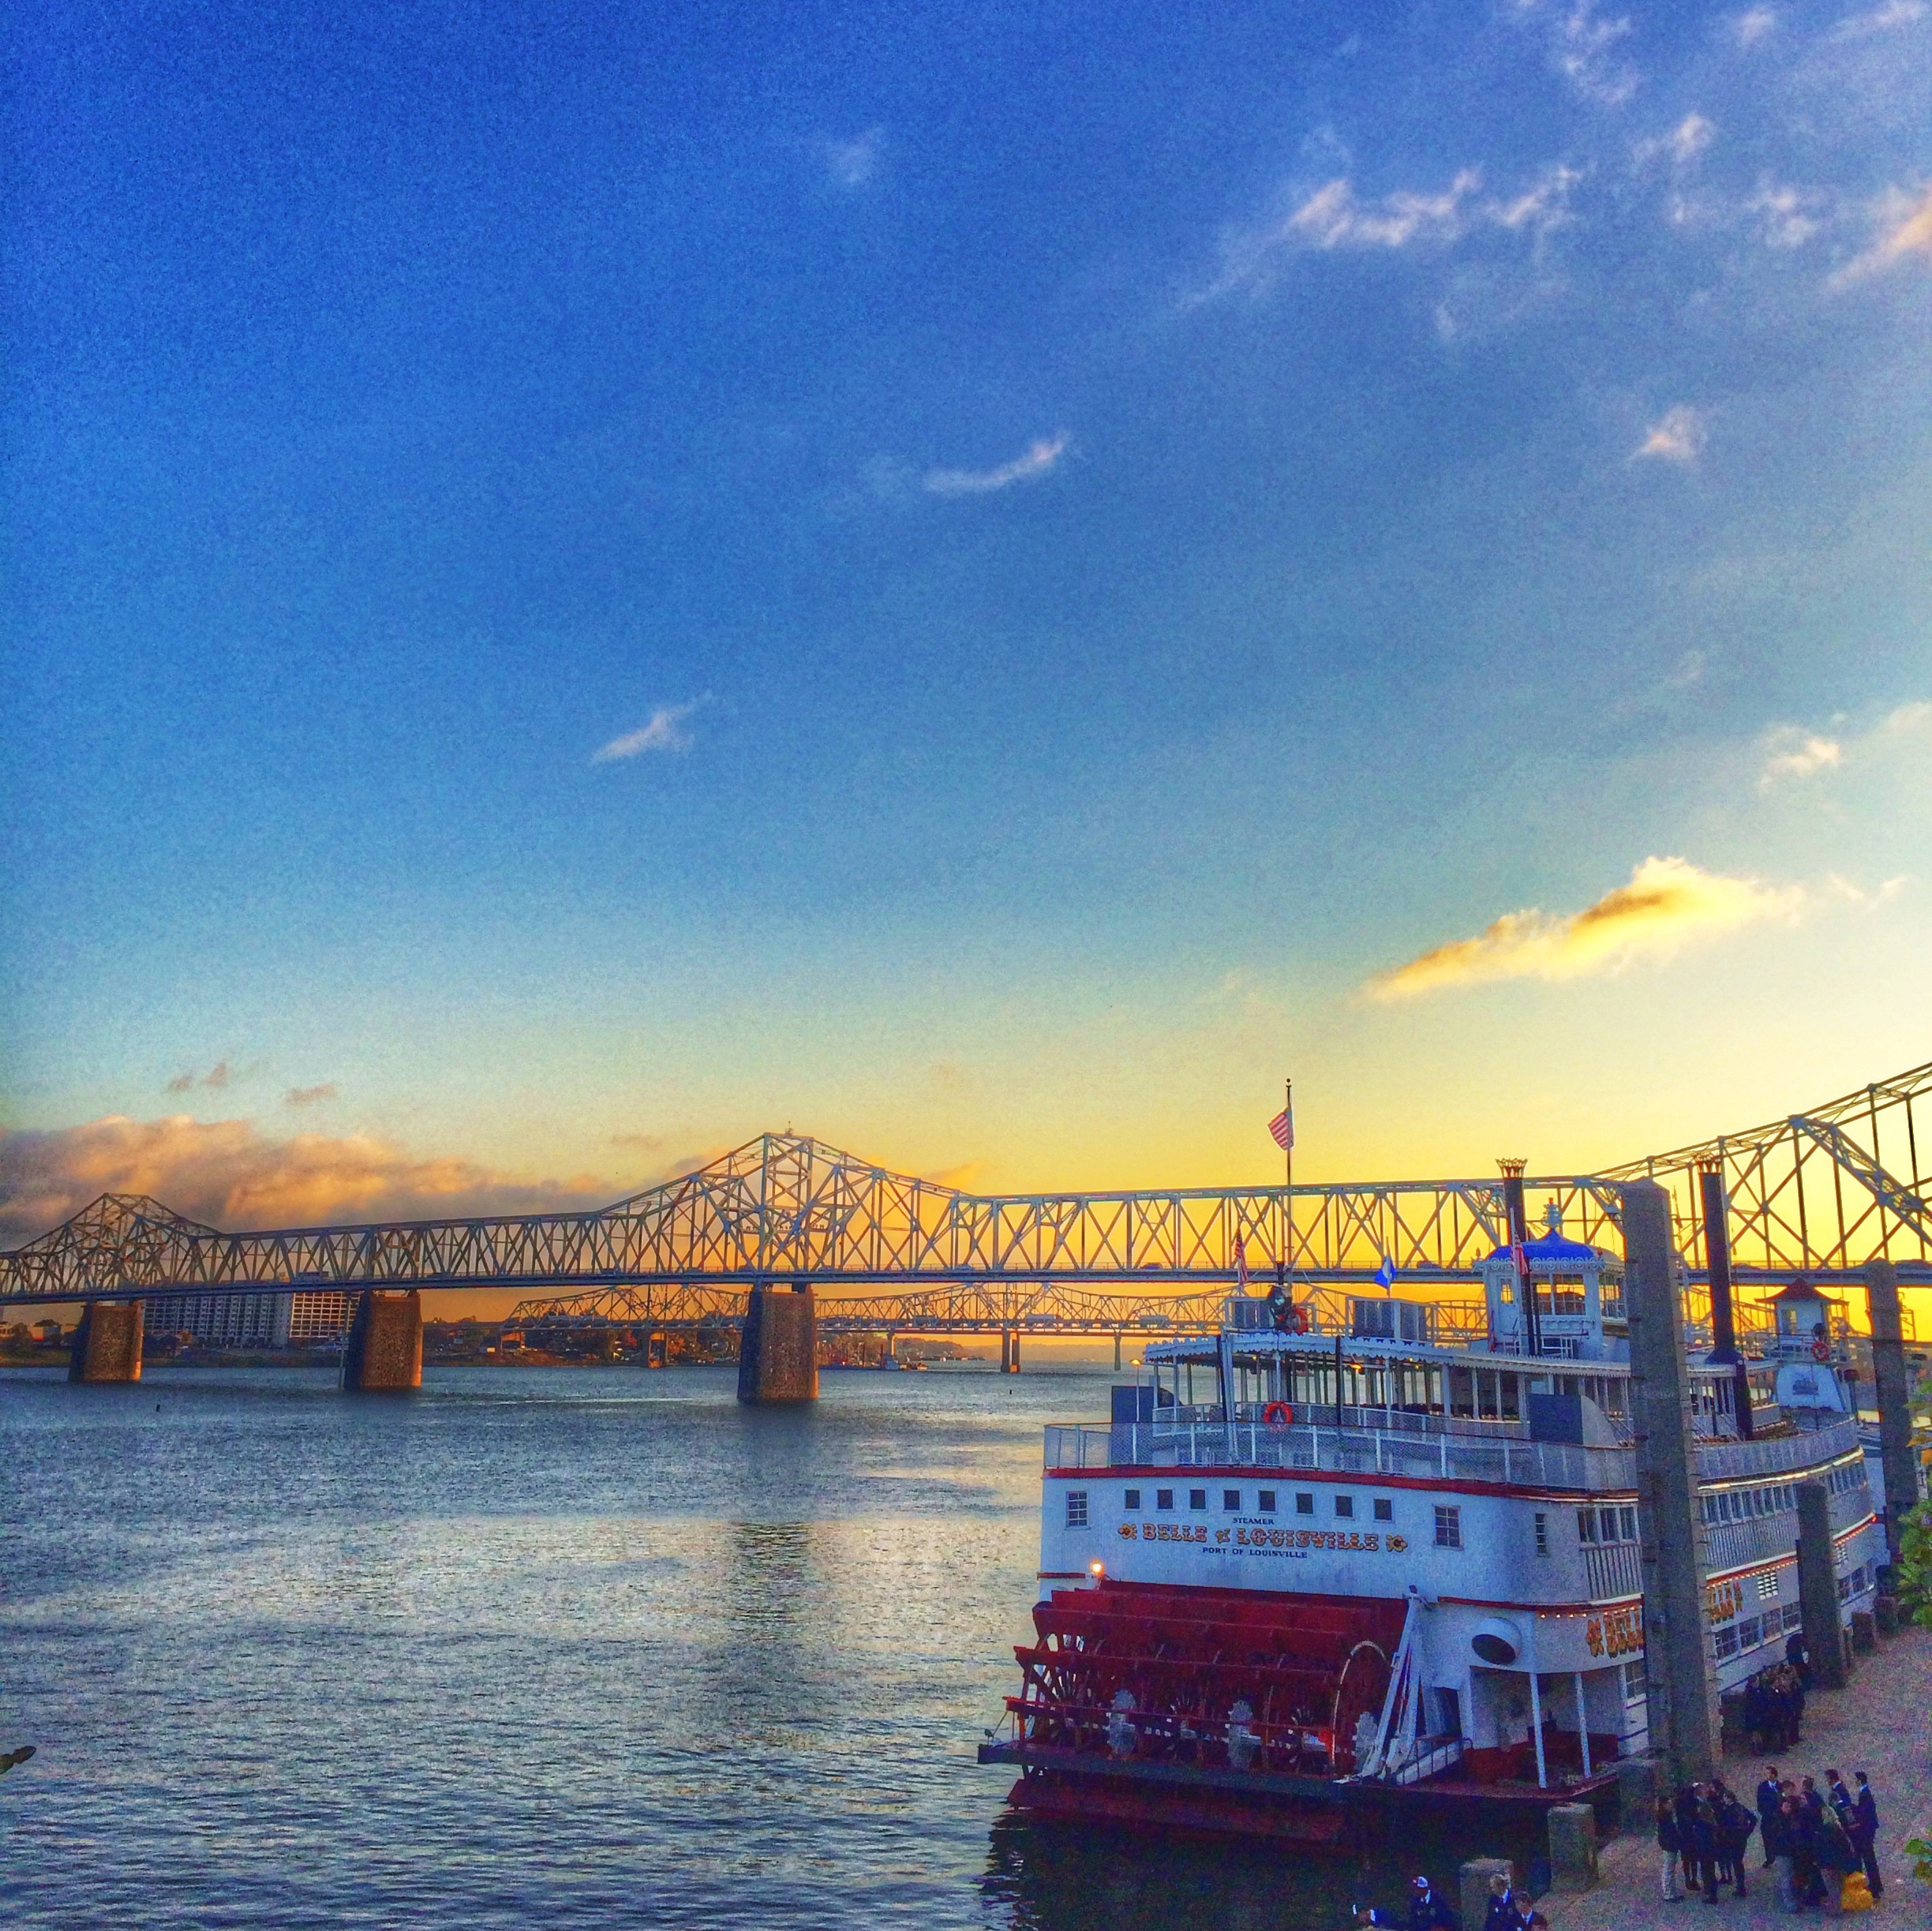 sky above the Belle of Louisville steamboat